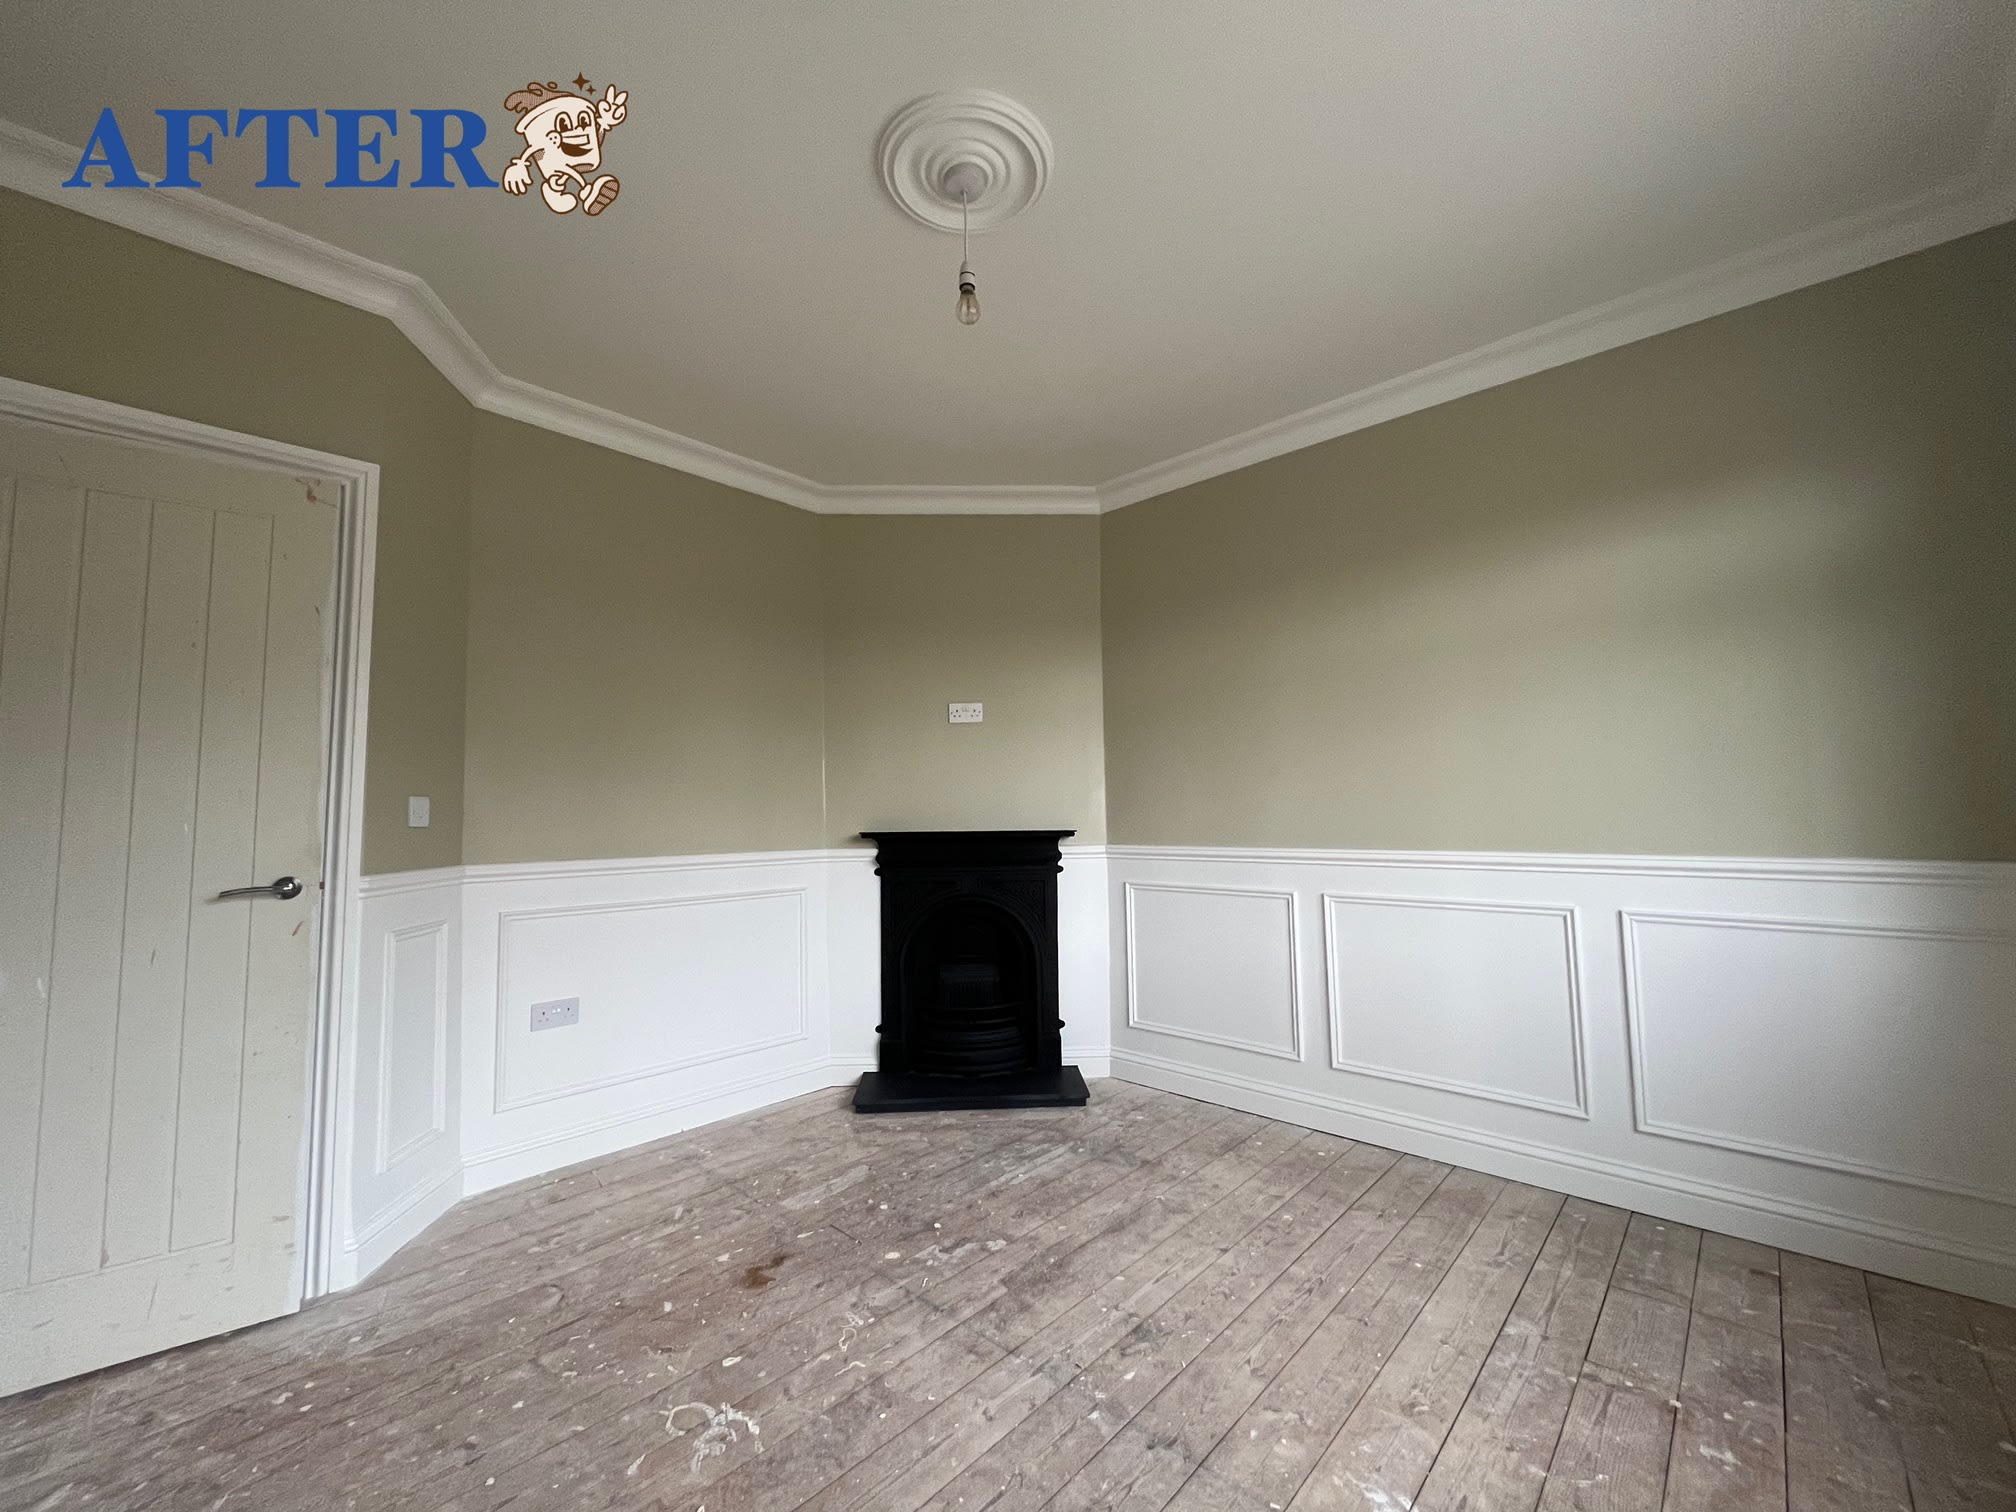 Images Mix Plastering and Decorating